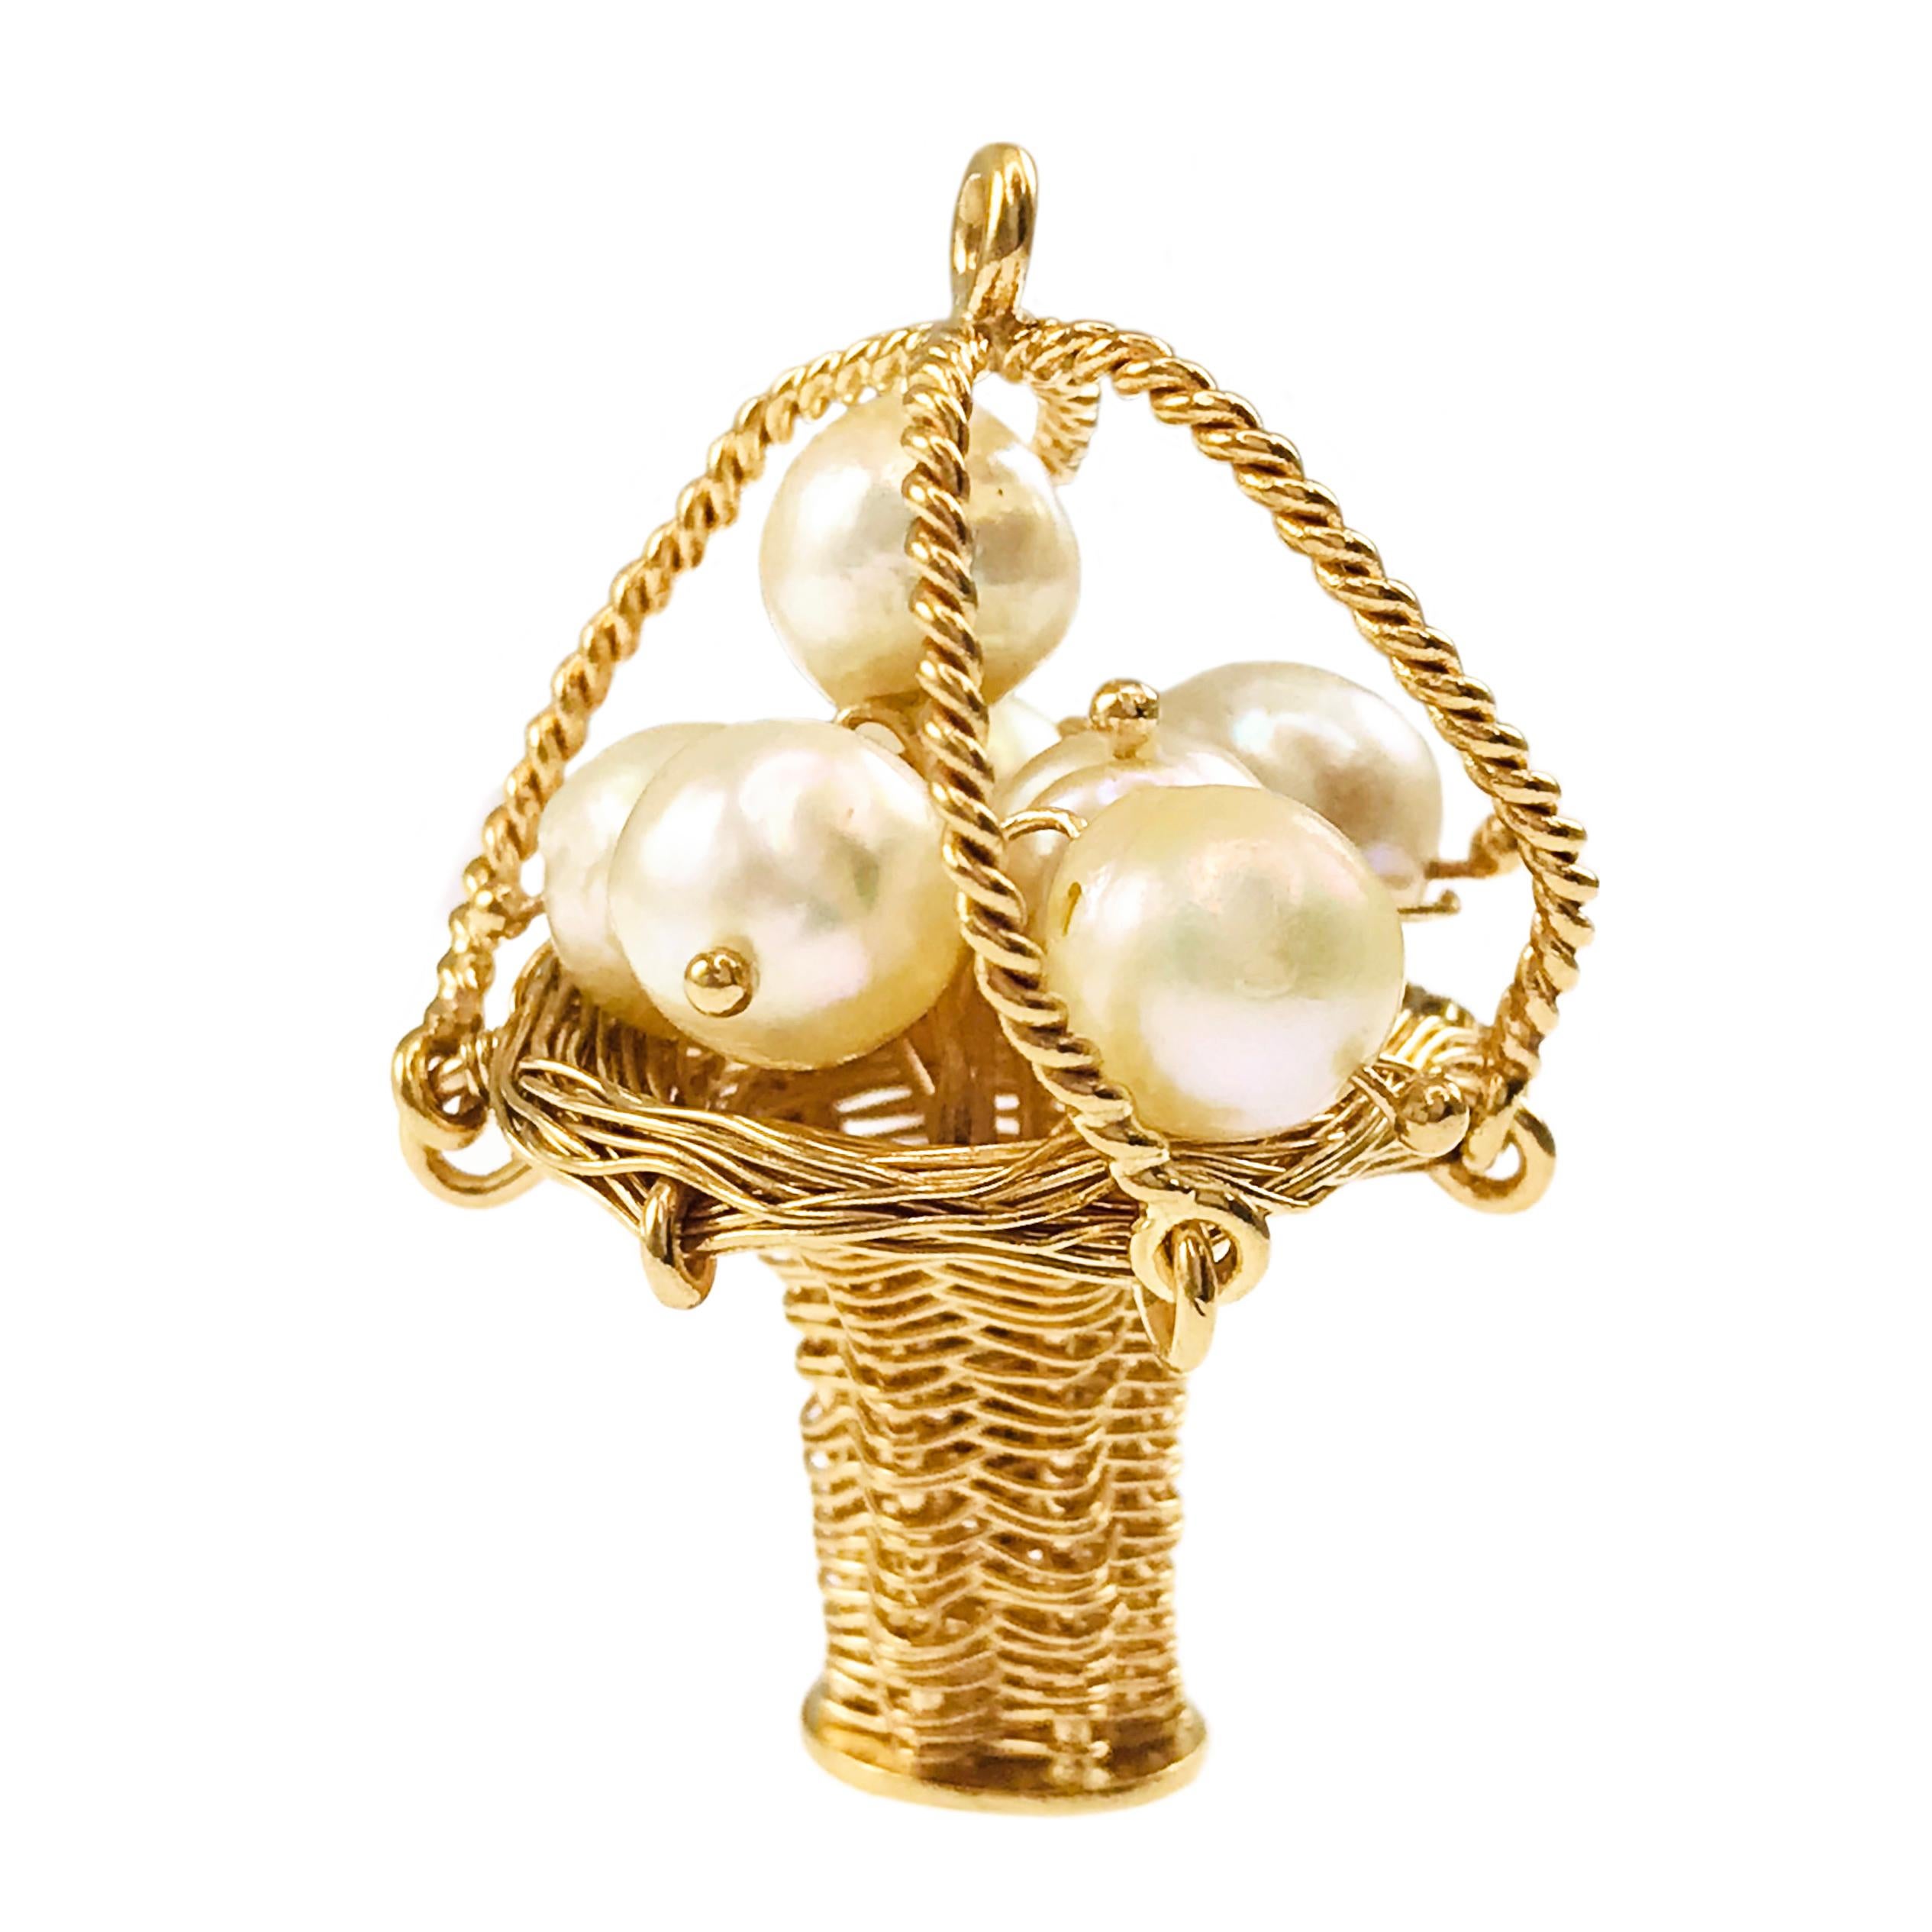 14 Karat Woven Wire Basket Cultured Pearls Pendant, circa the 1950s. Six cultured Pearls are featured atop this woven wire basket with four handles that meet and the top to form the bail. The pendant measures 24.23mm wide x 34.2mm tall. The total